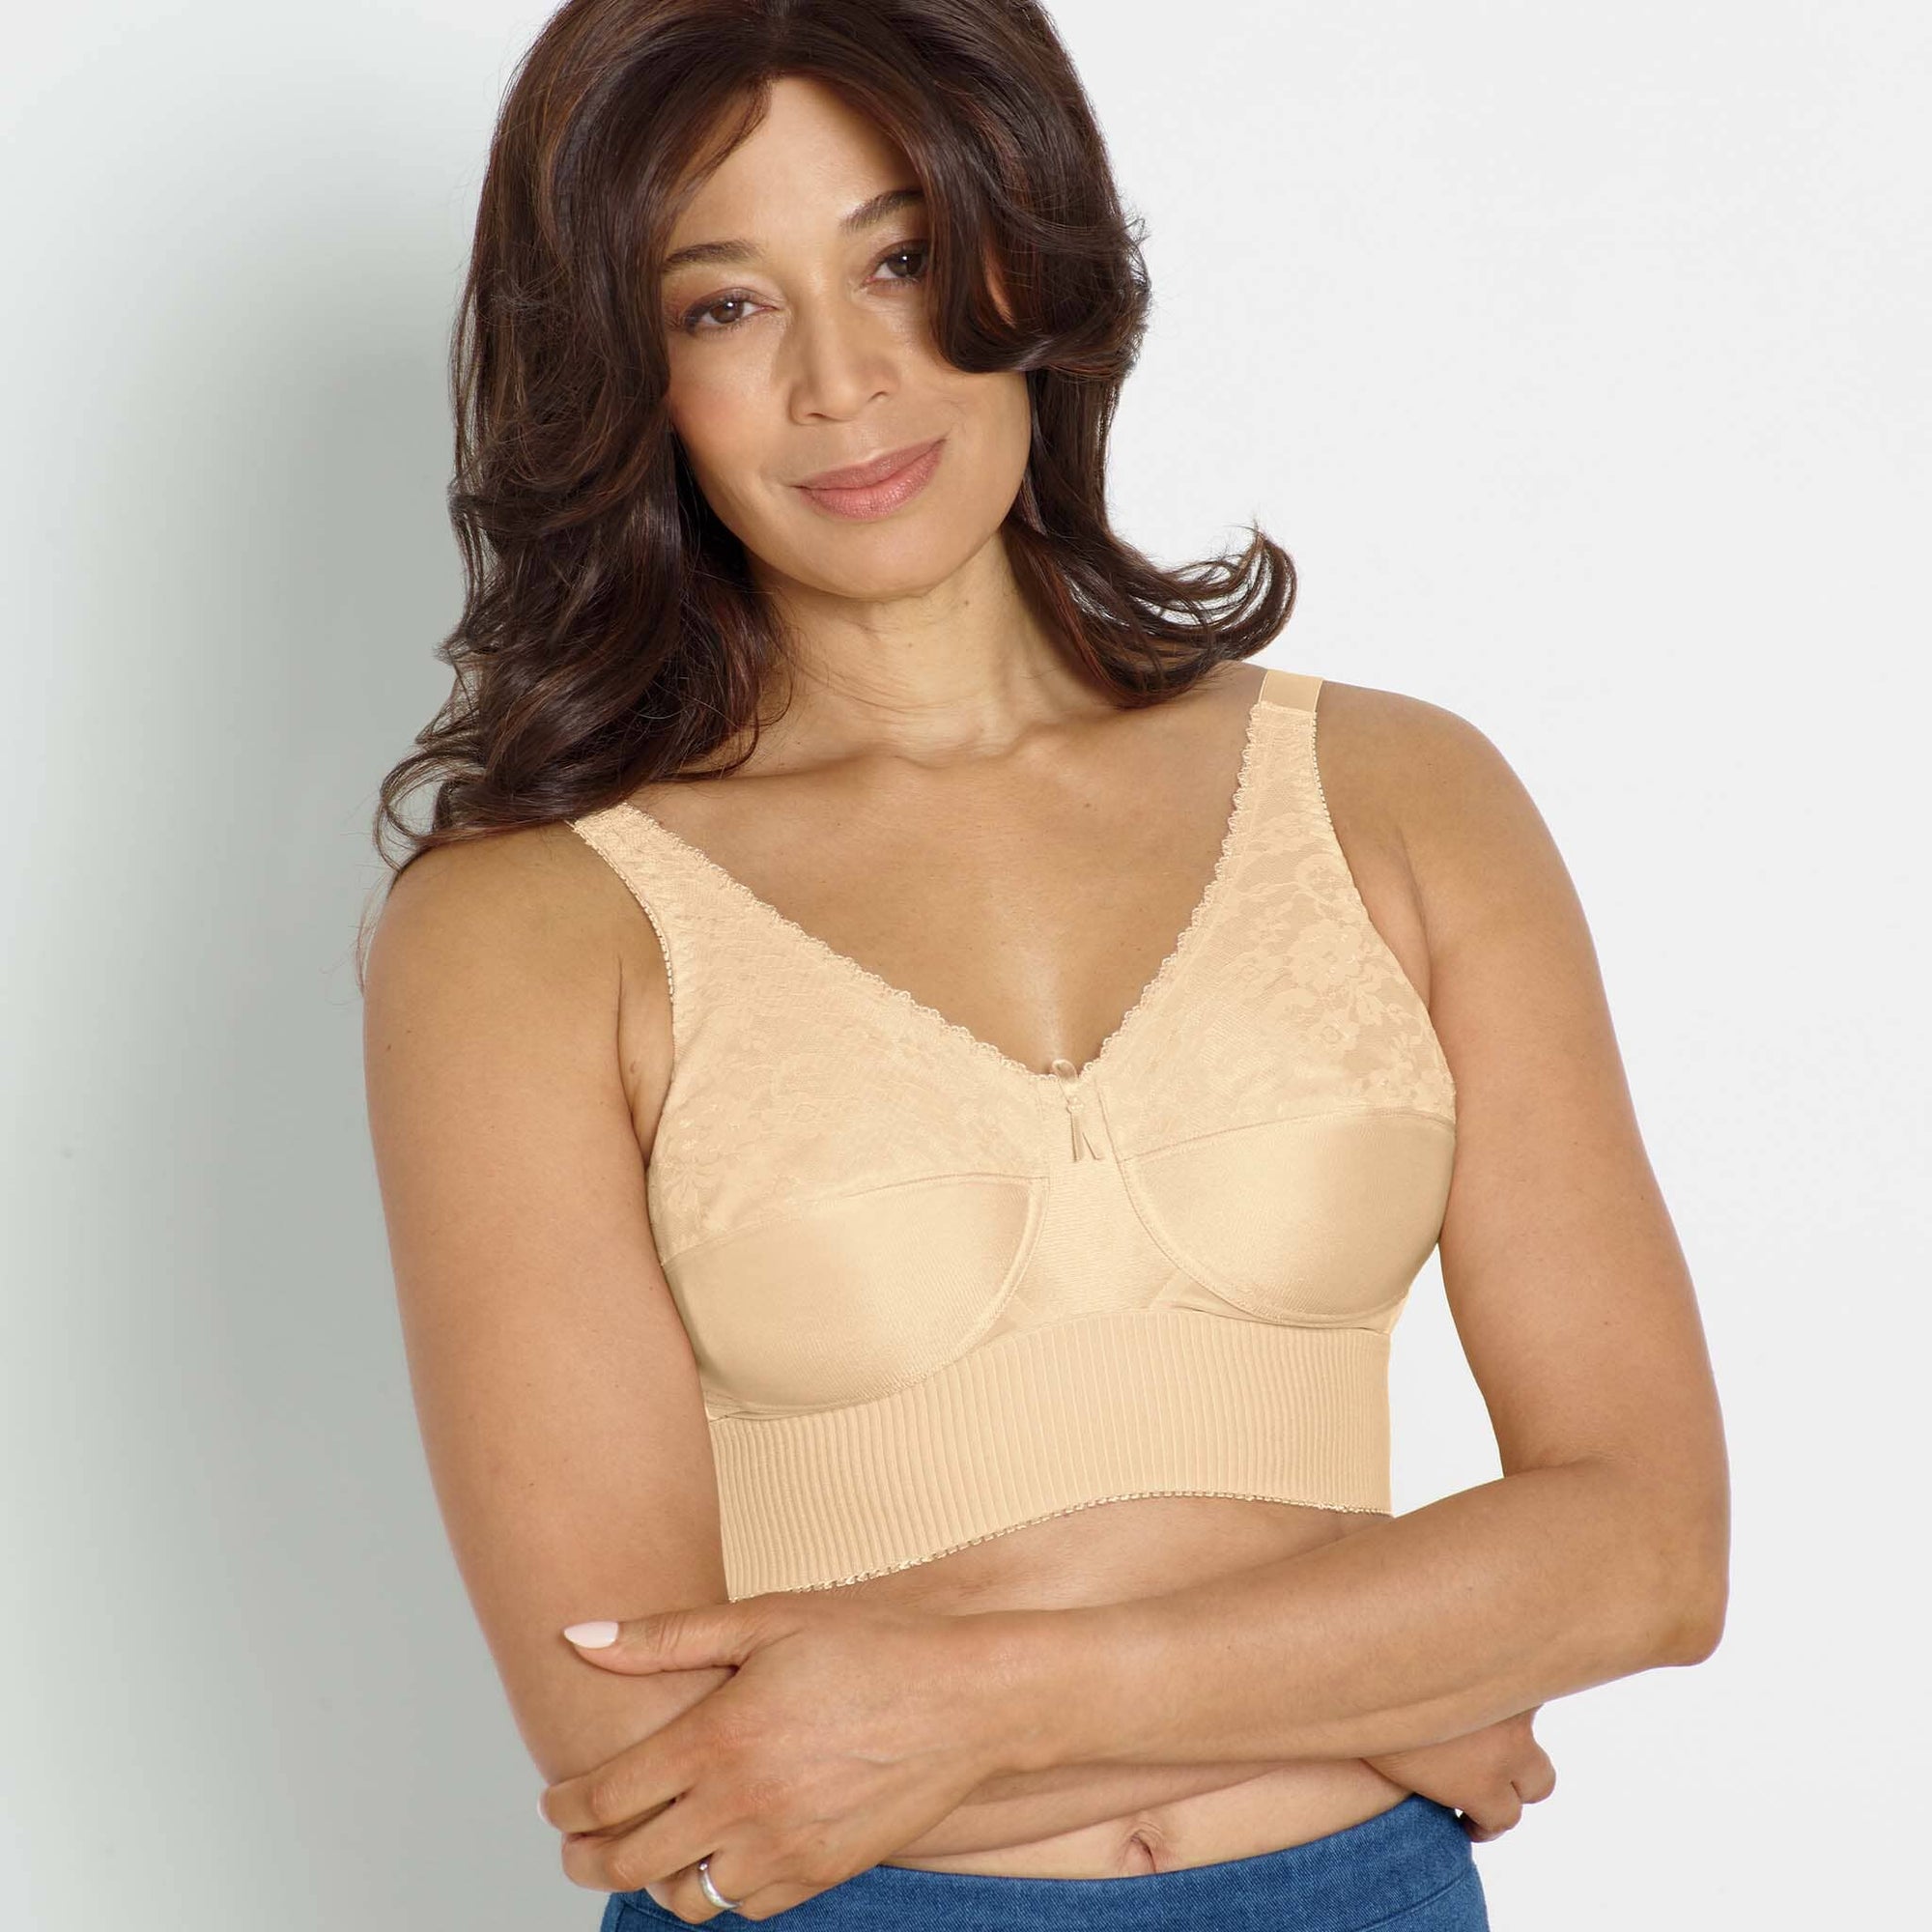 Front view #7648 Post Mastectomy Long Line Bra shown in beige.